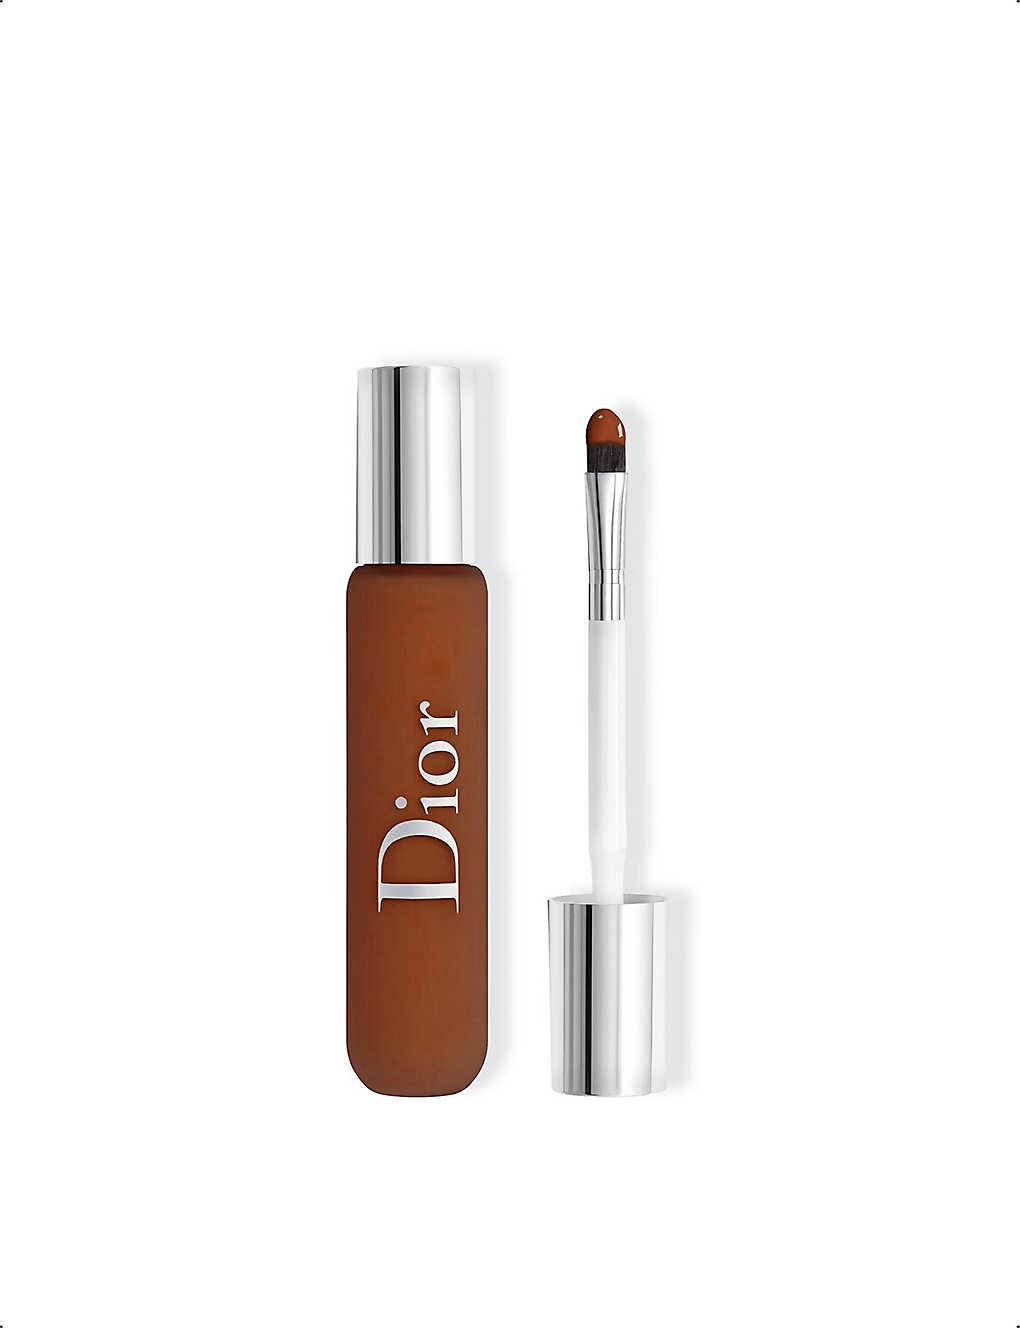 Dior Backstage Face & Body Flash Perfector Concealer 11ml In 7n